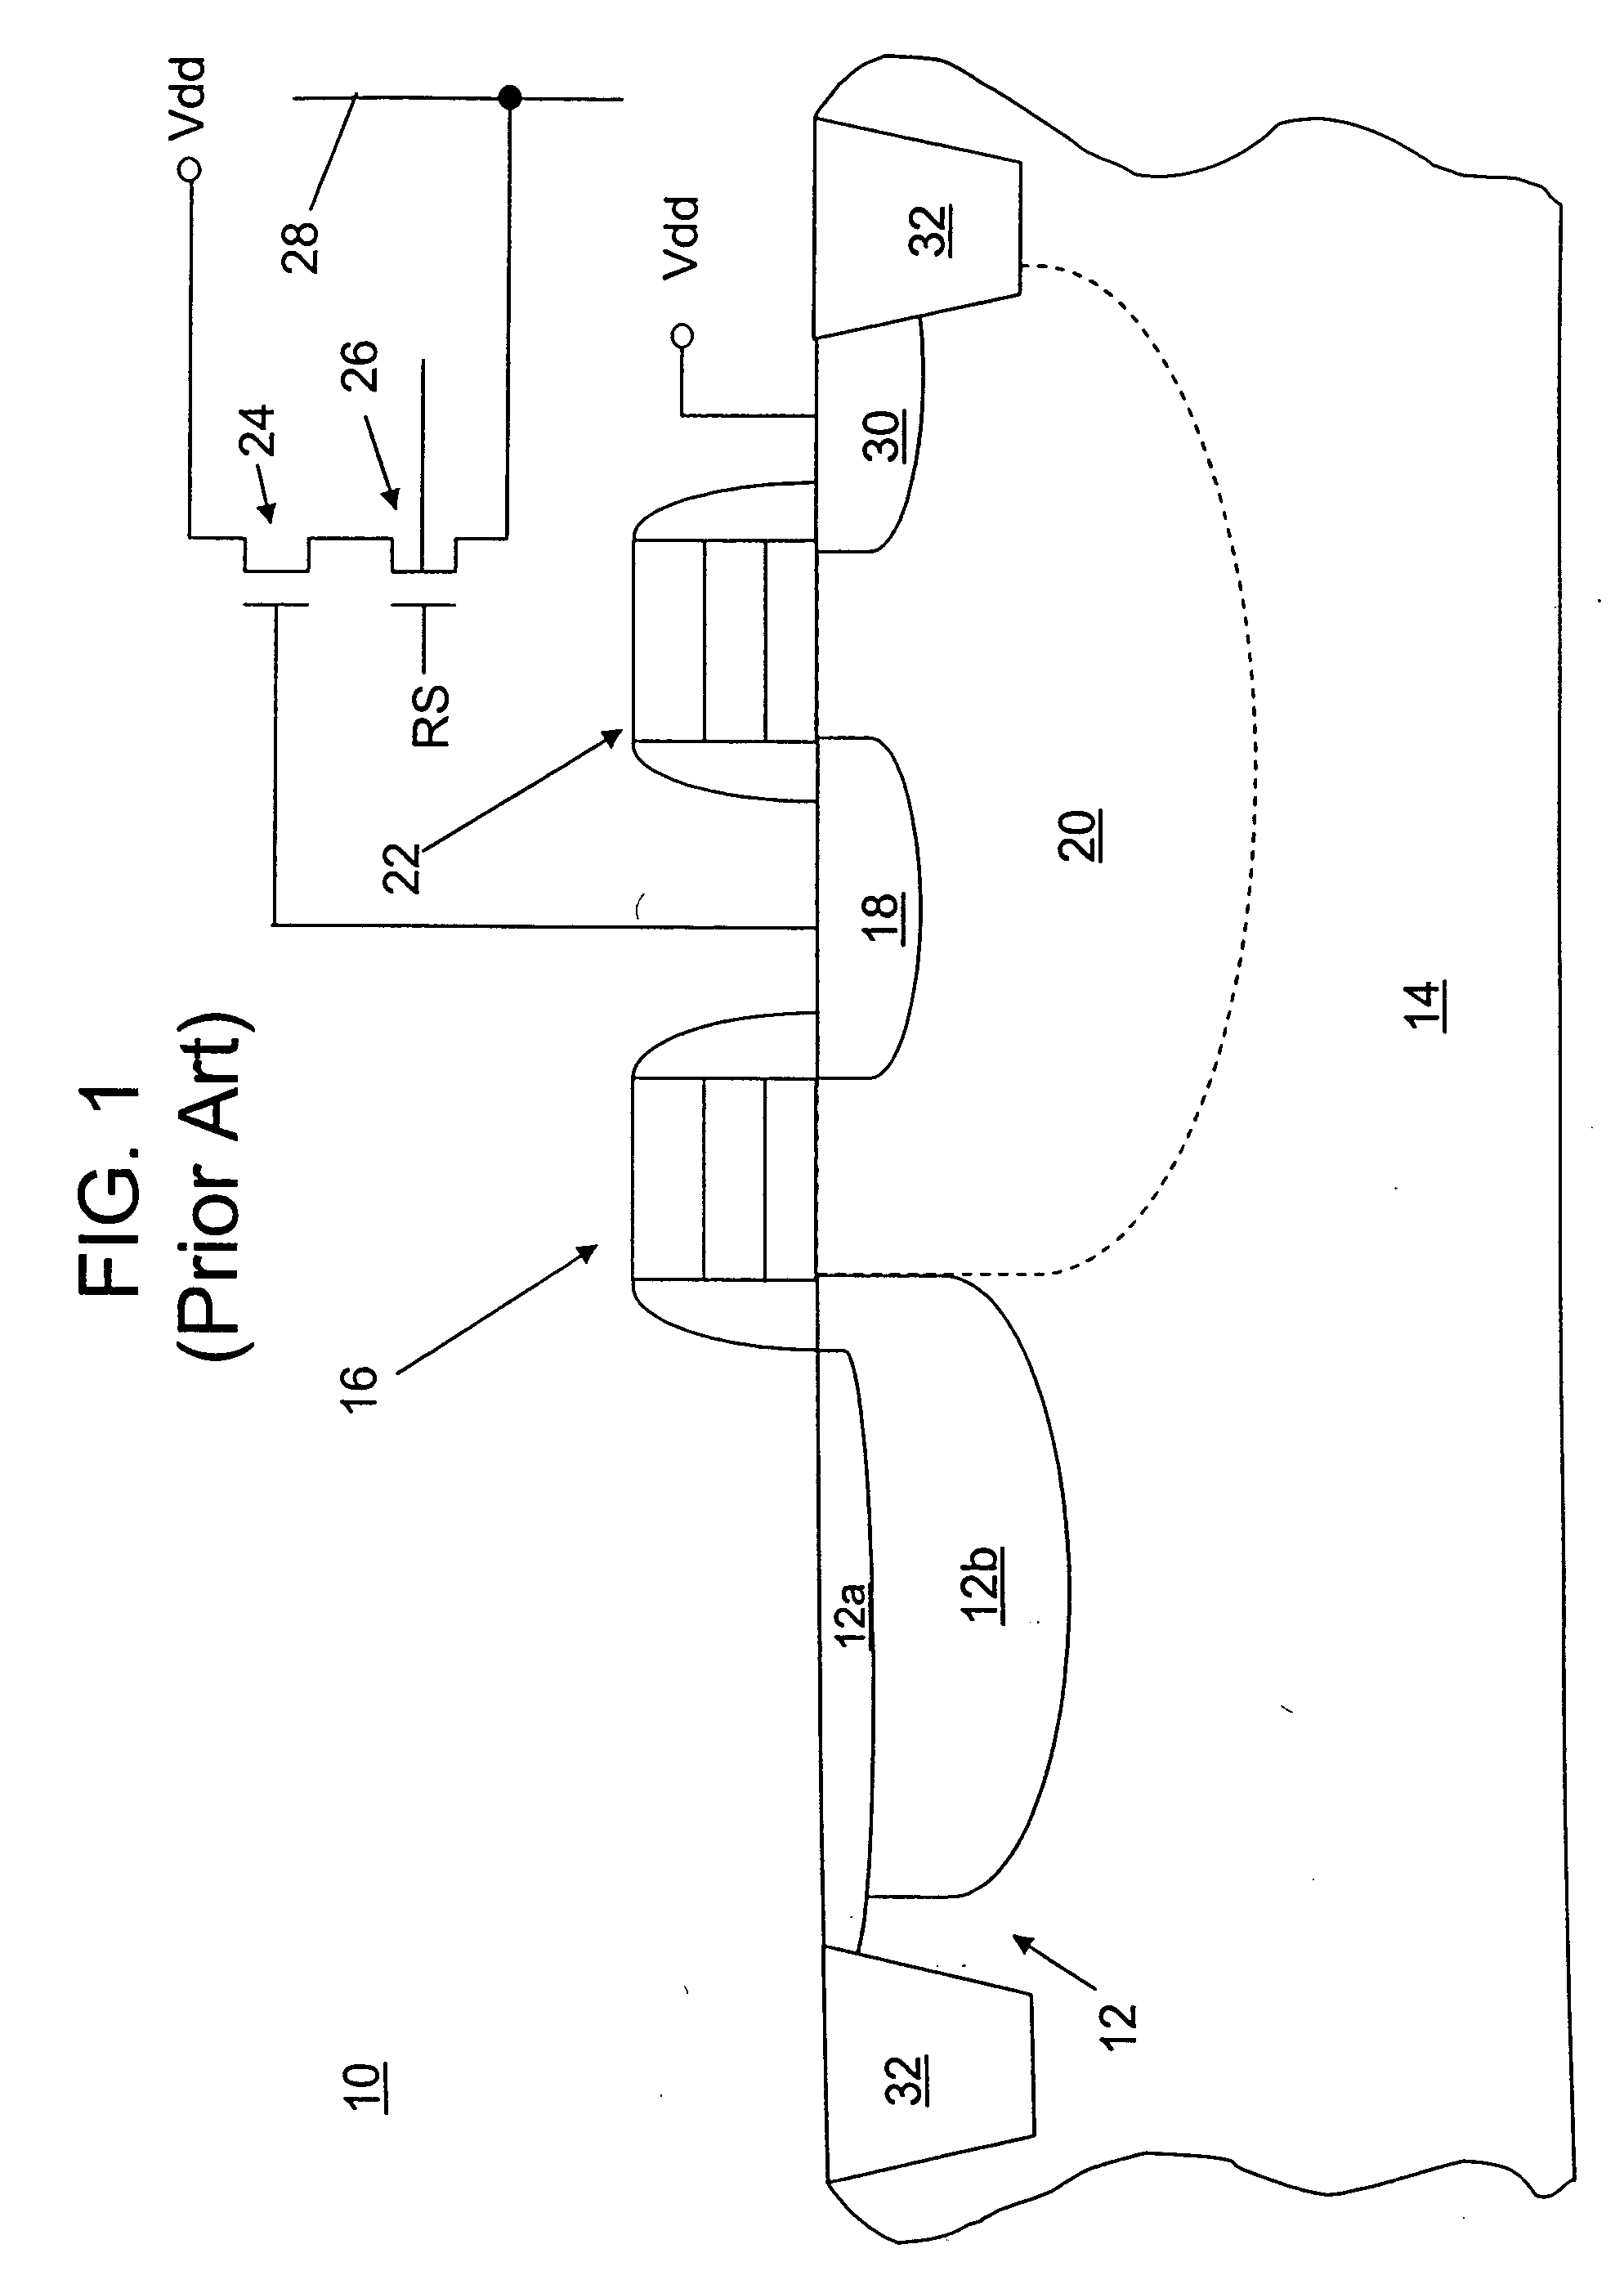 Imager photo diode capacitor structure with reduced process variation sensitivity